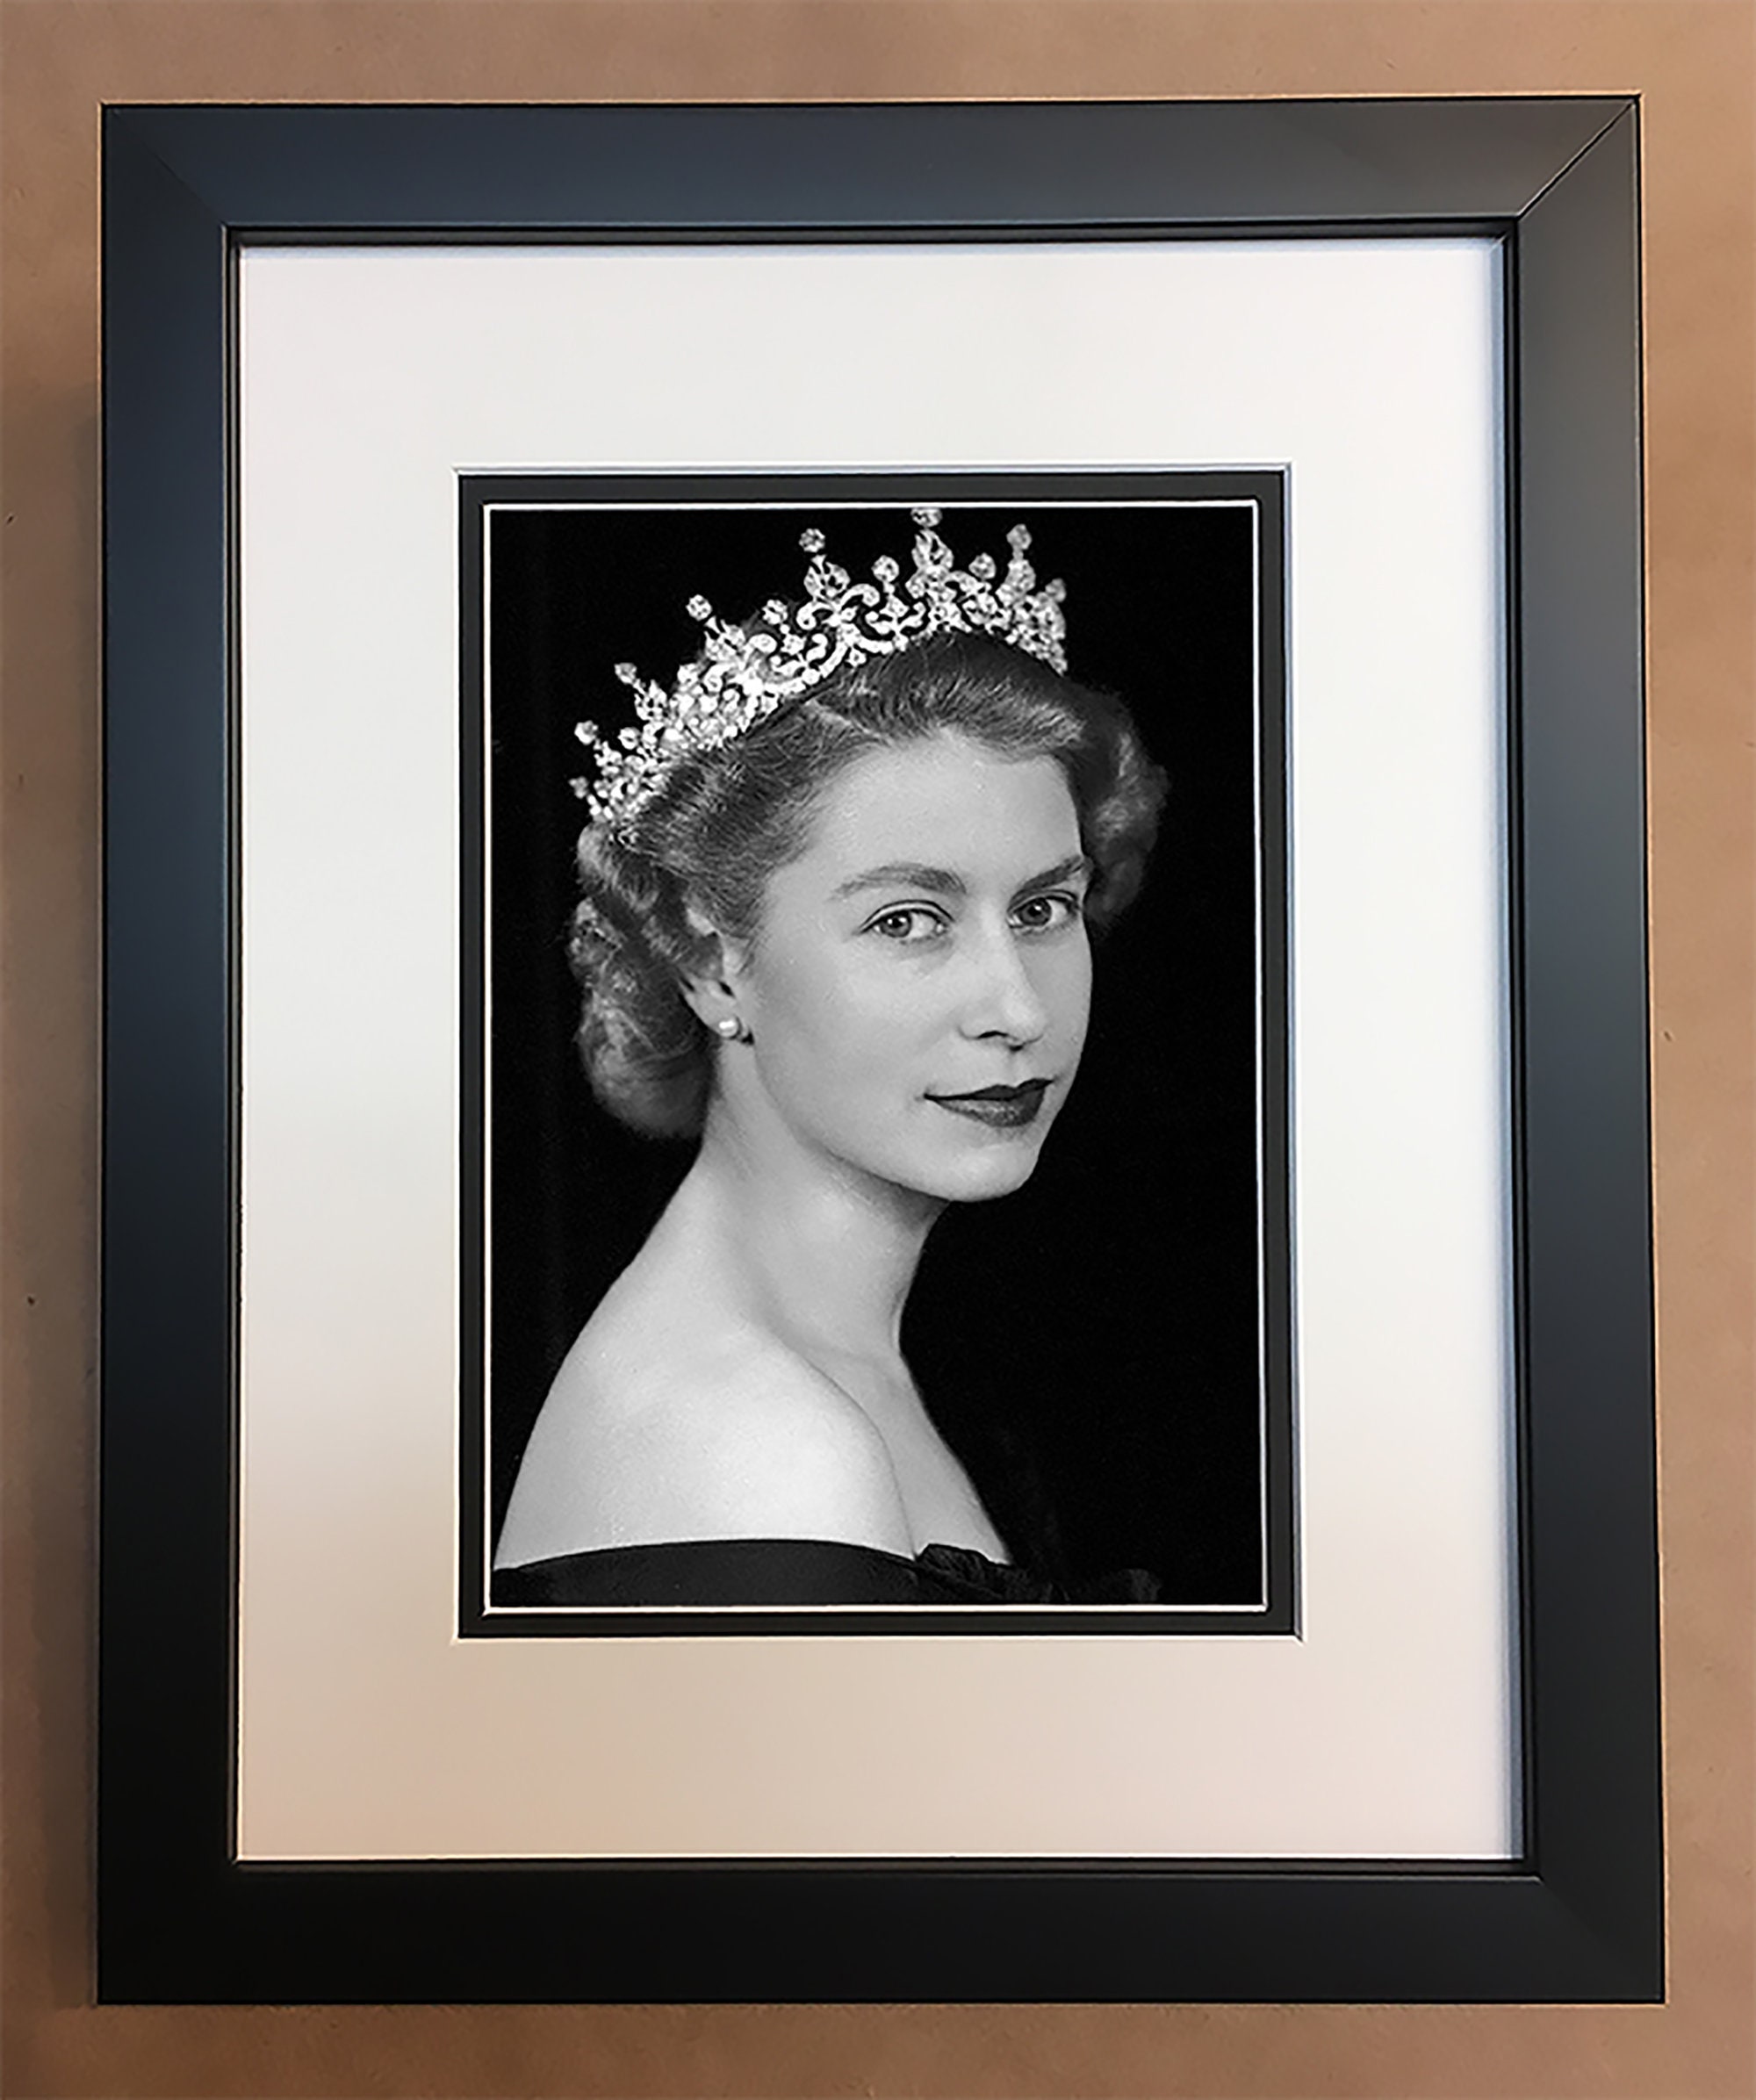 Queen Elizabeth Black and White Photo Professionally Framed | Etsy